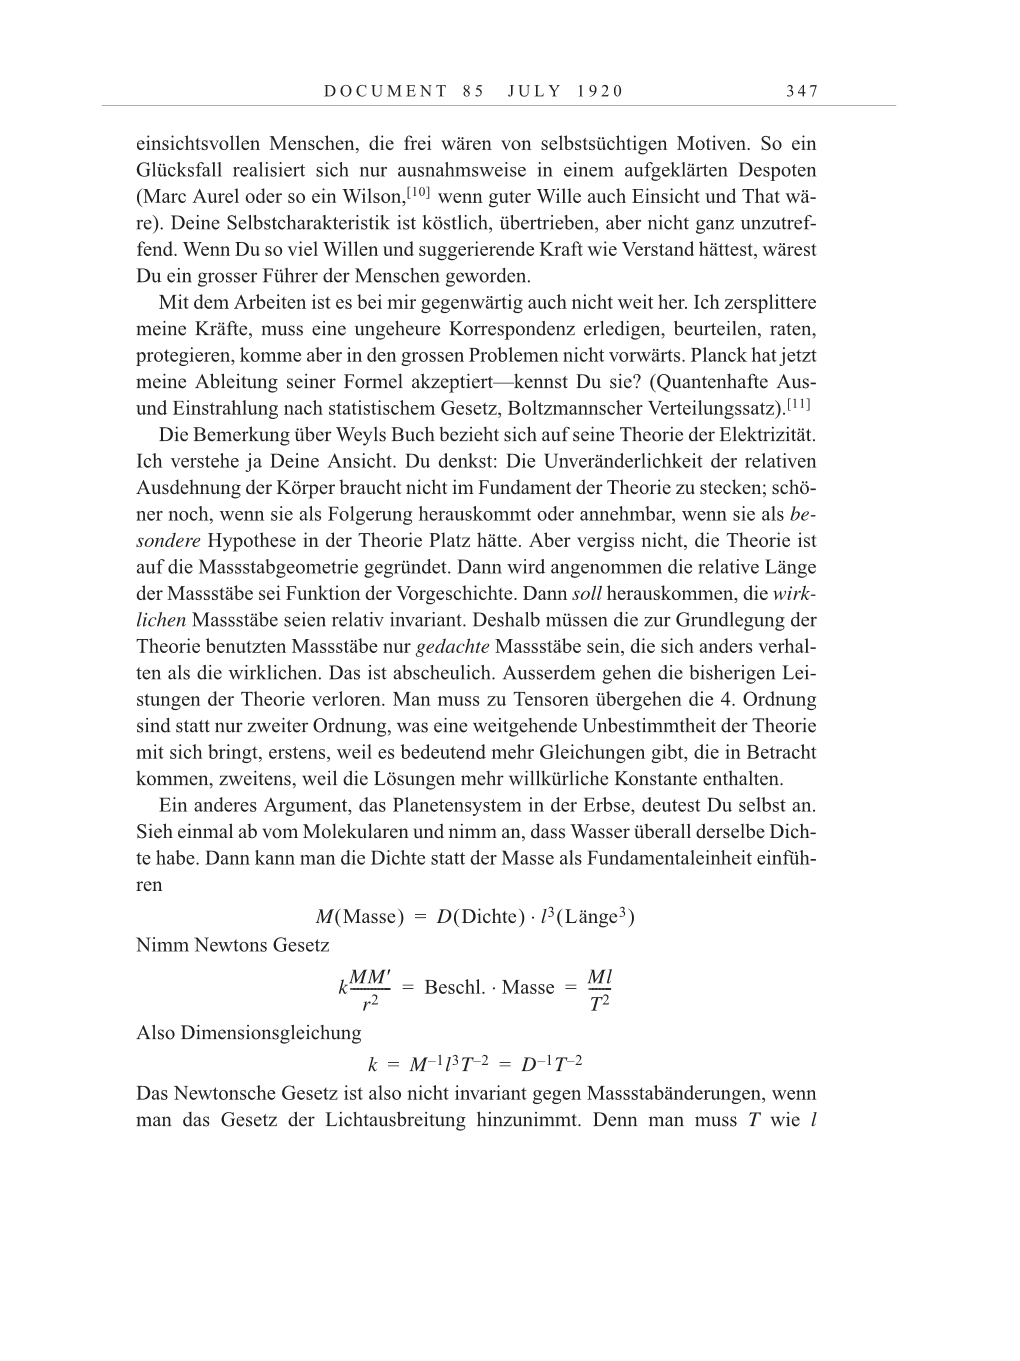 Volume 10: The Berlin Years: Correspondence May-December 1920 / Supplementary Correspondence 1909-1920 page 347